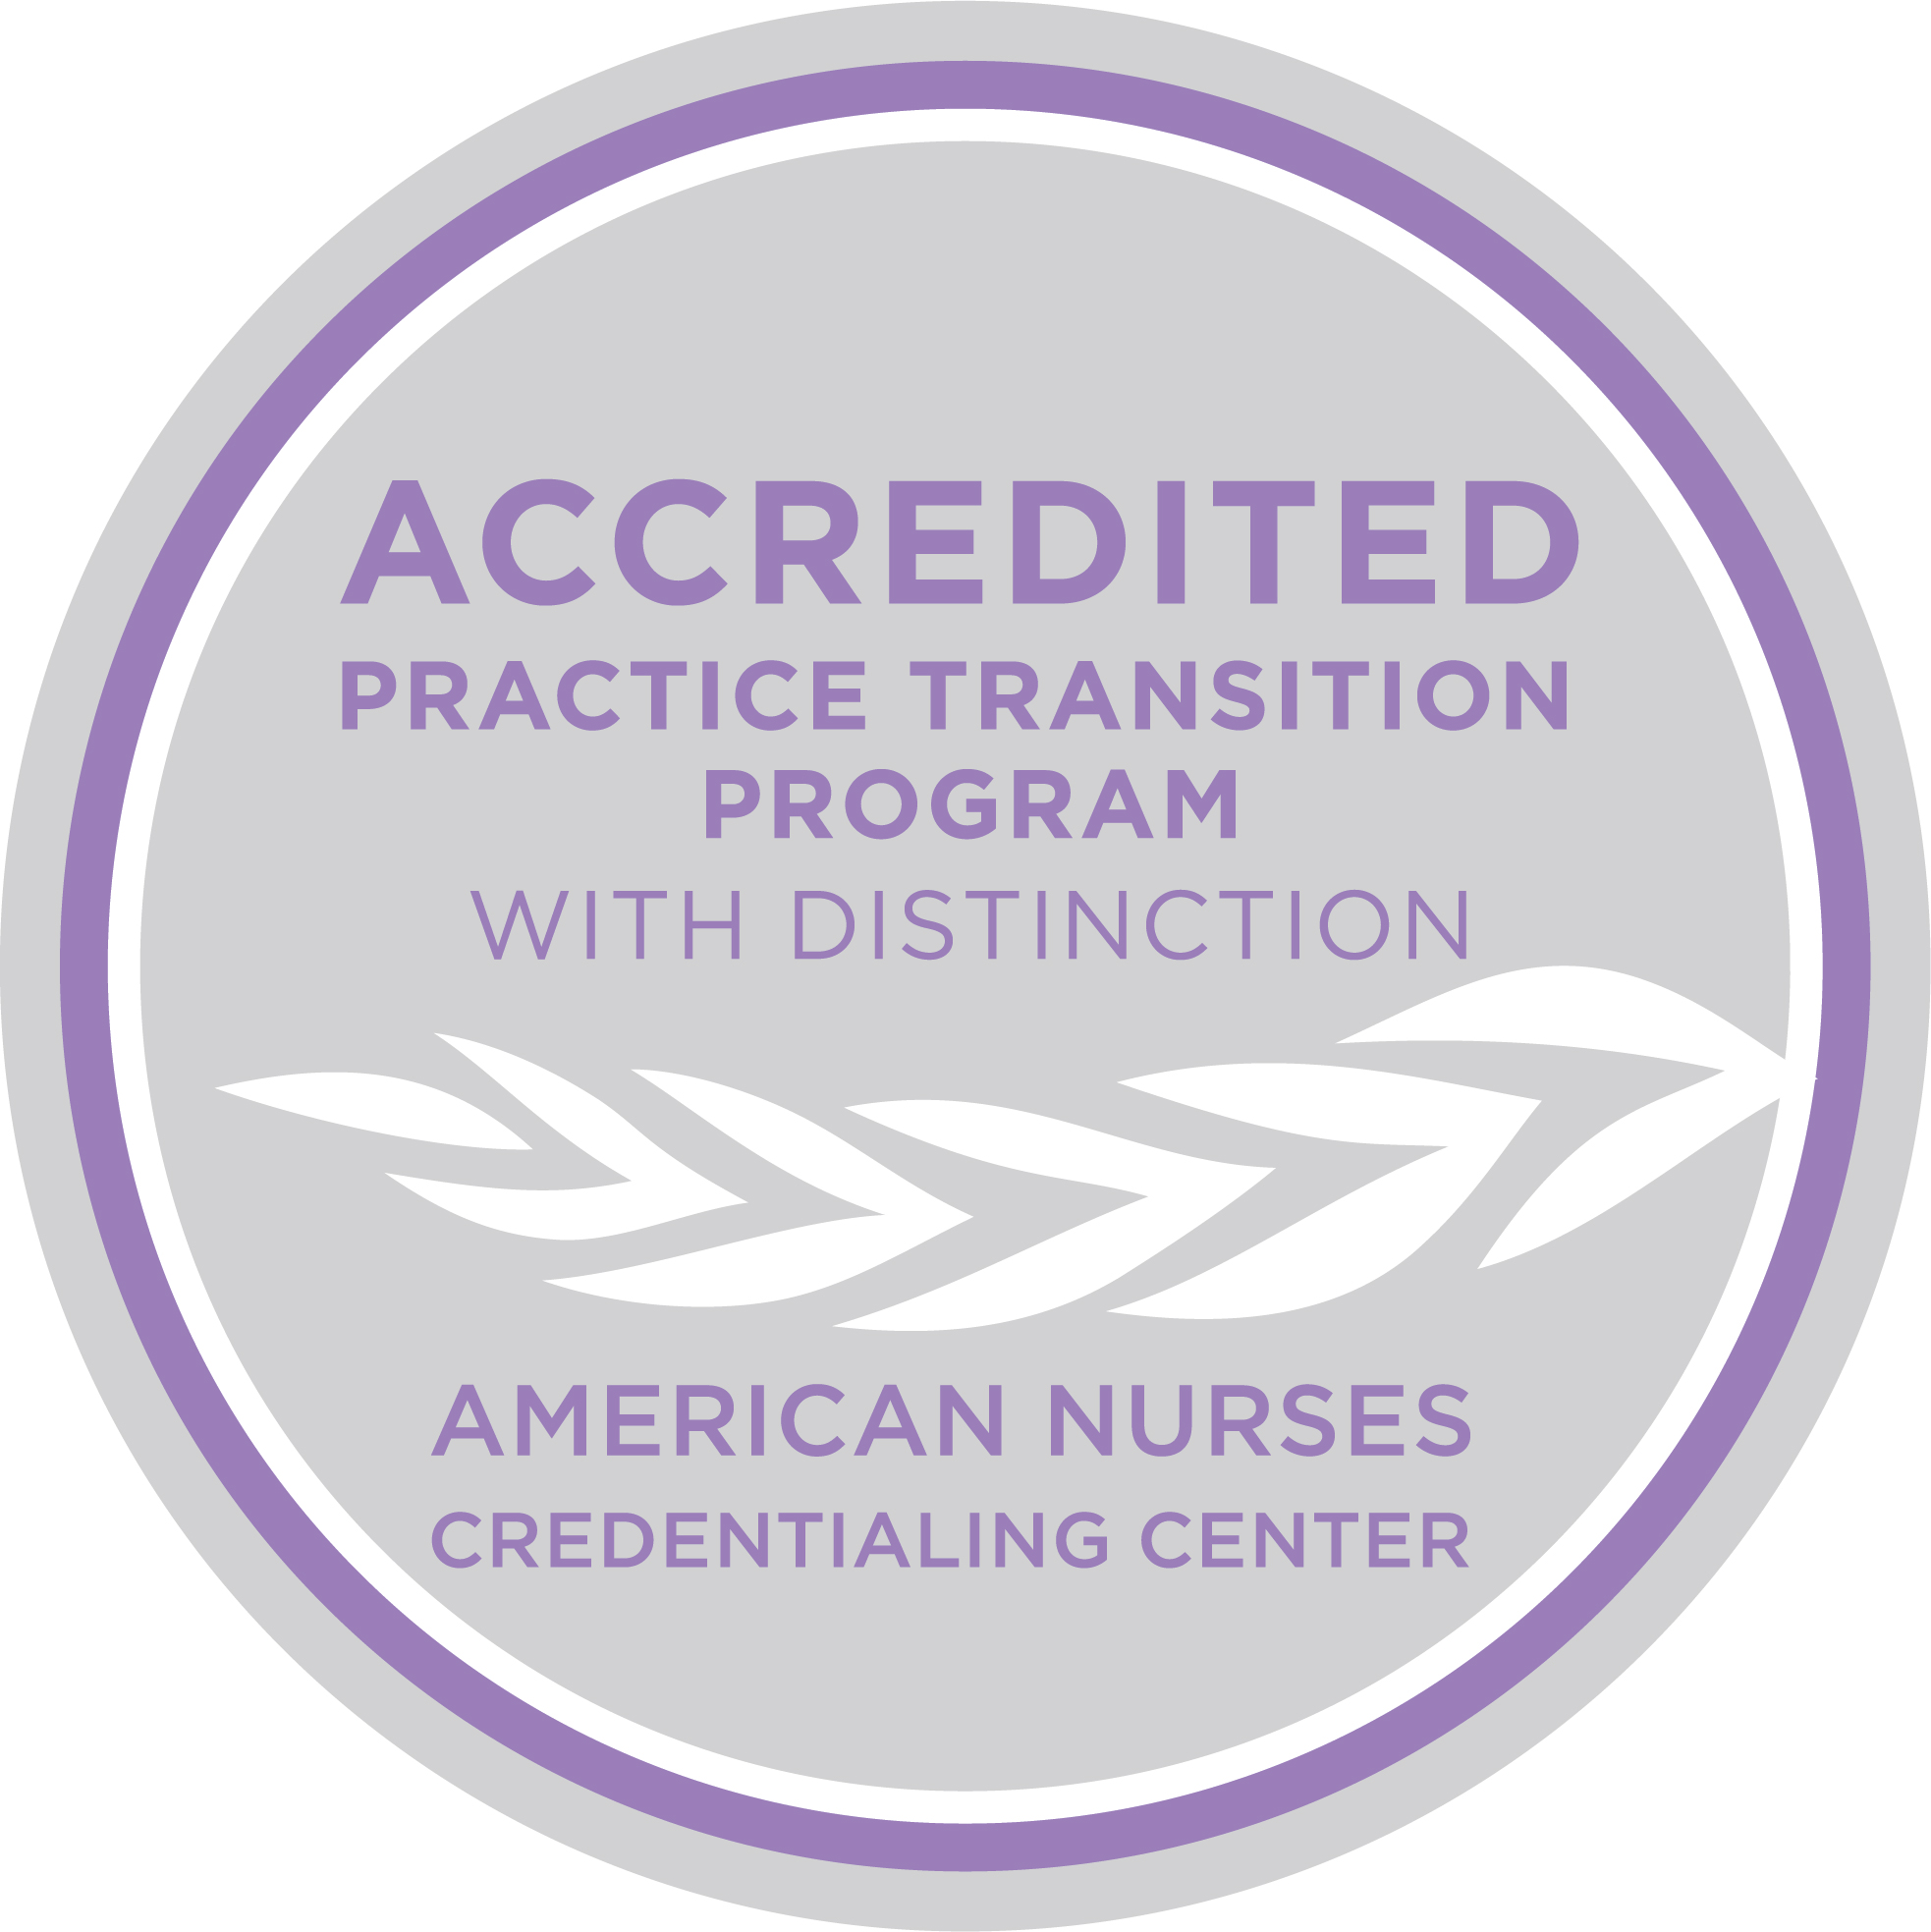 Accredited Practice Transition Program with Distinction